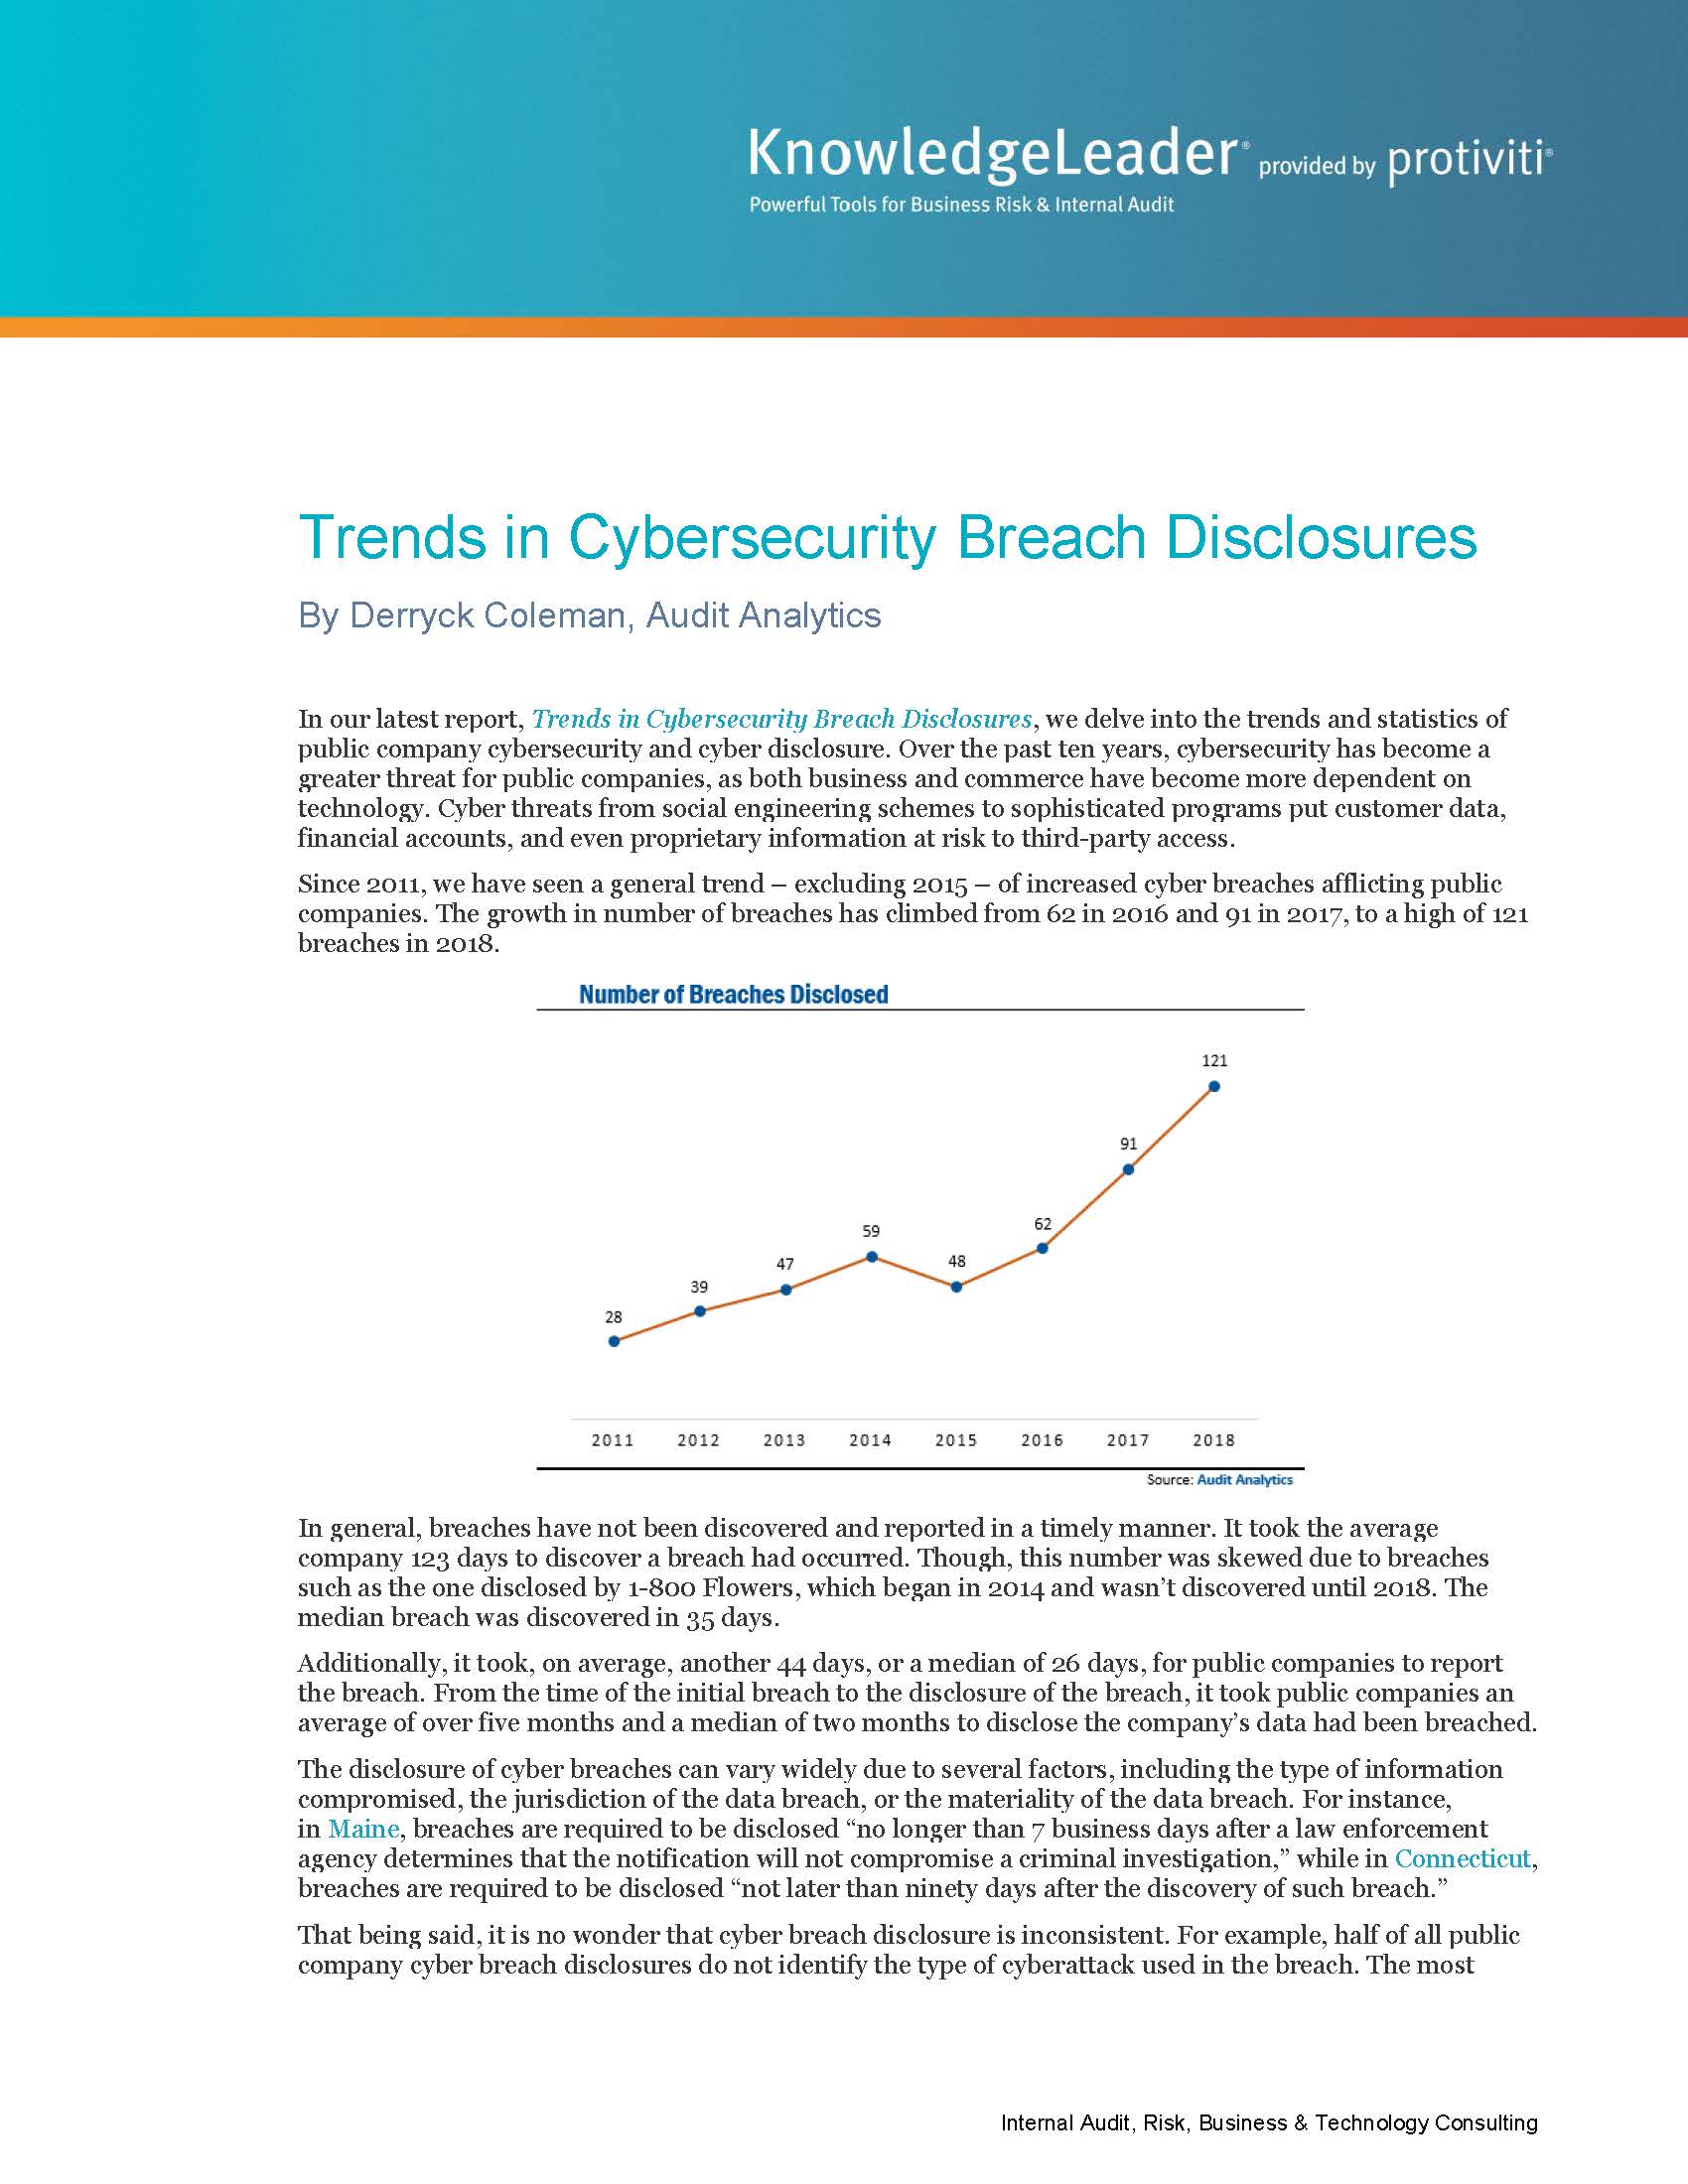 Screenshot of the first page of Trends in Cybersecurity Breach Disclosures